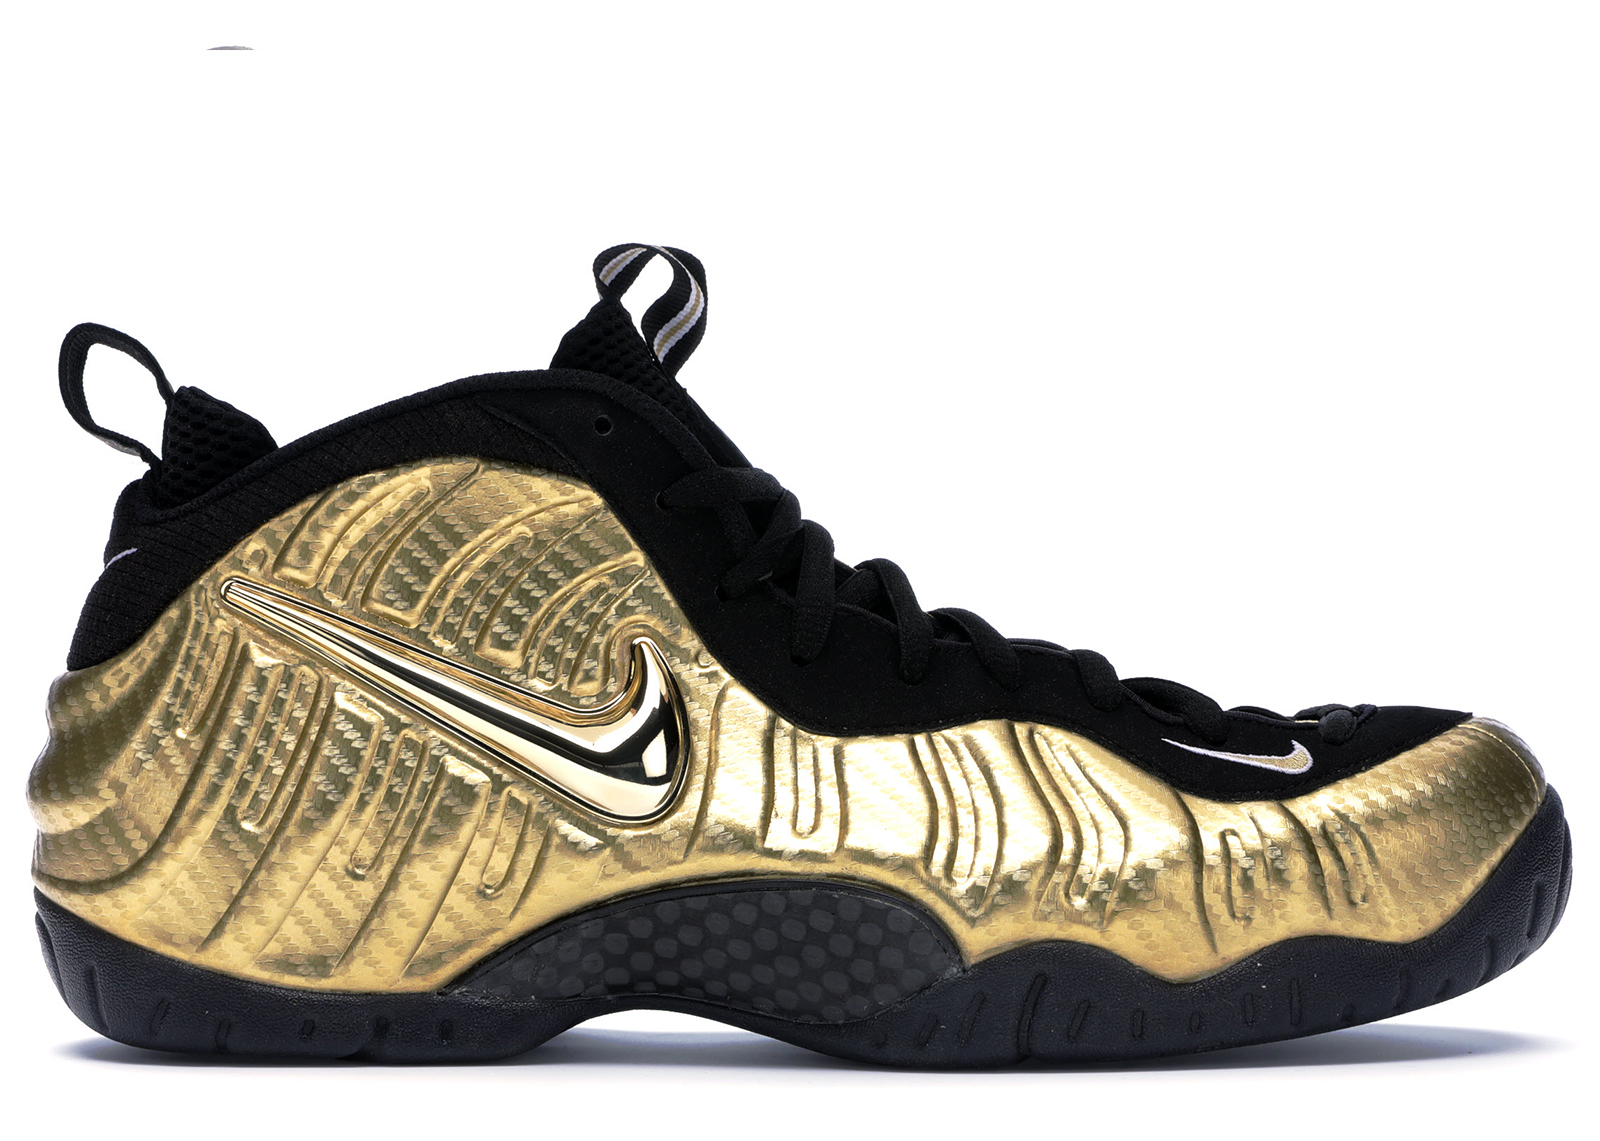 nike foamposite gold and black